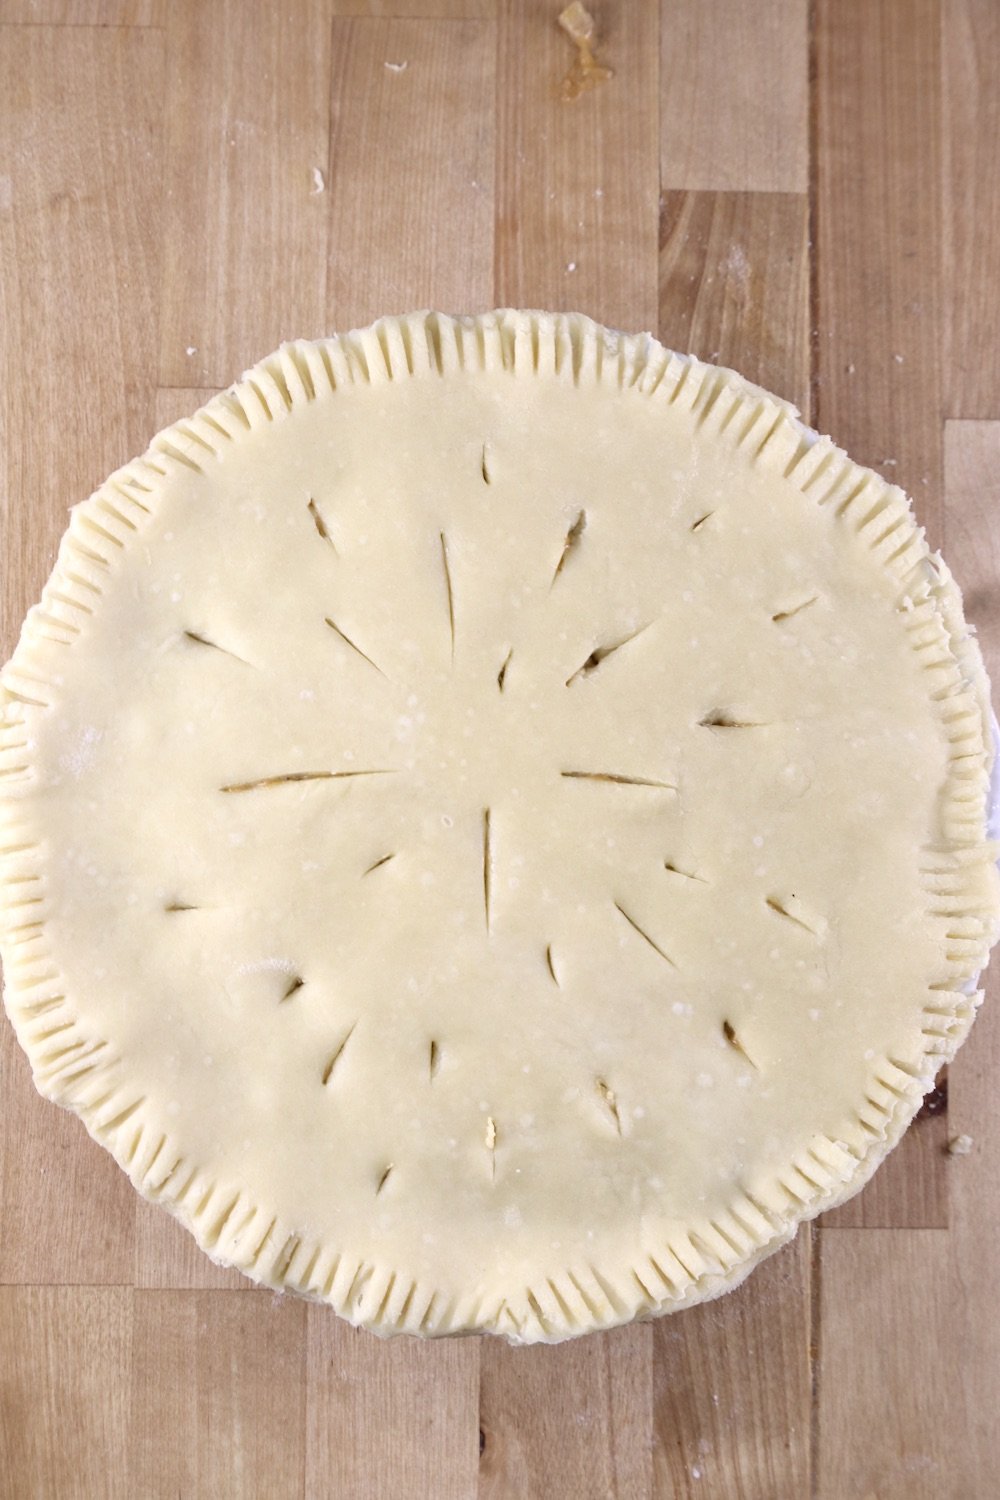 Crawfish pie with slits cut into top in a random pattern